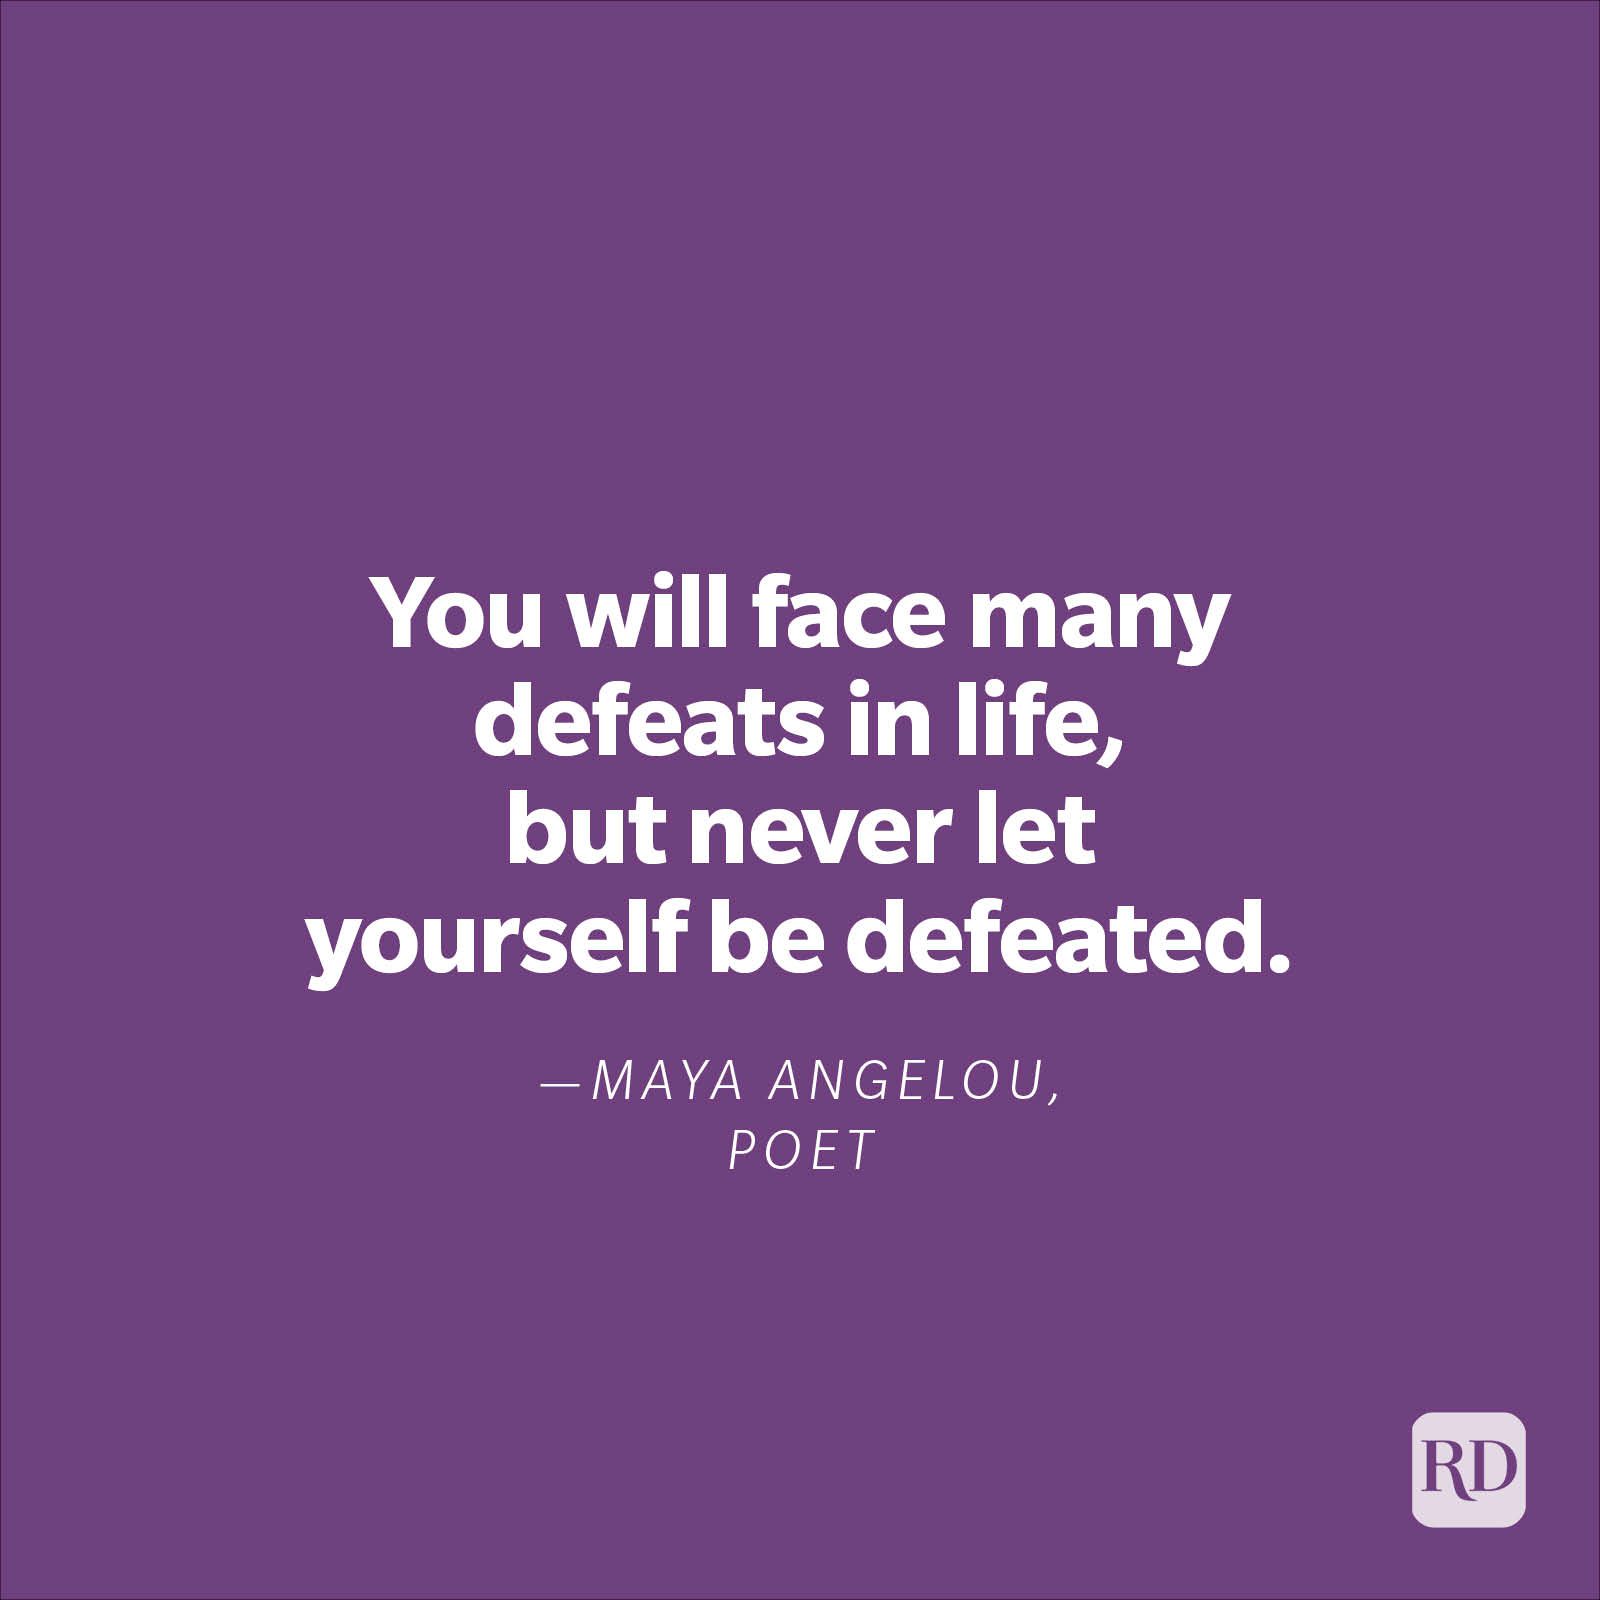 "You will face many defeats in life, but never let yourself be defeated." —Maya Angelou, poet.